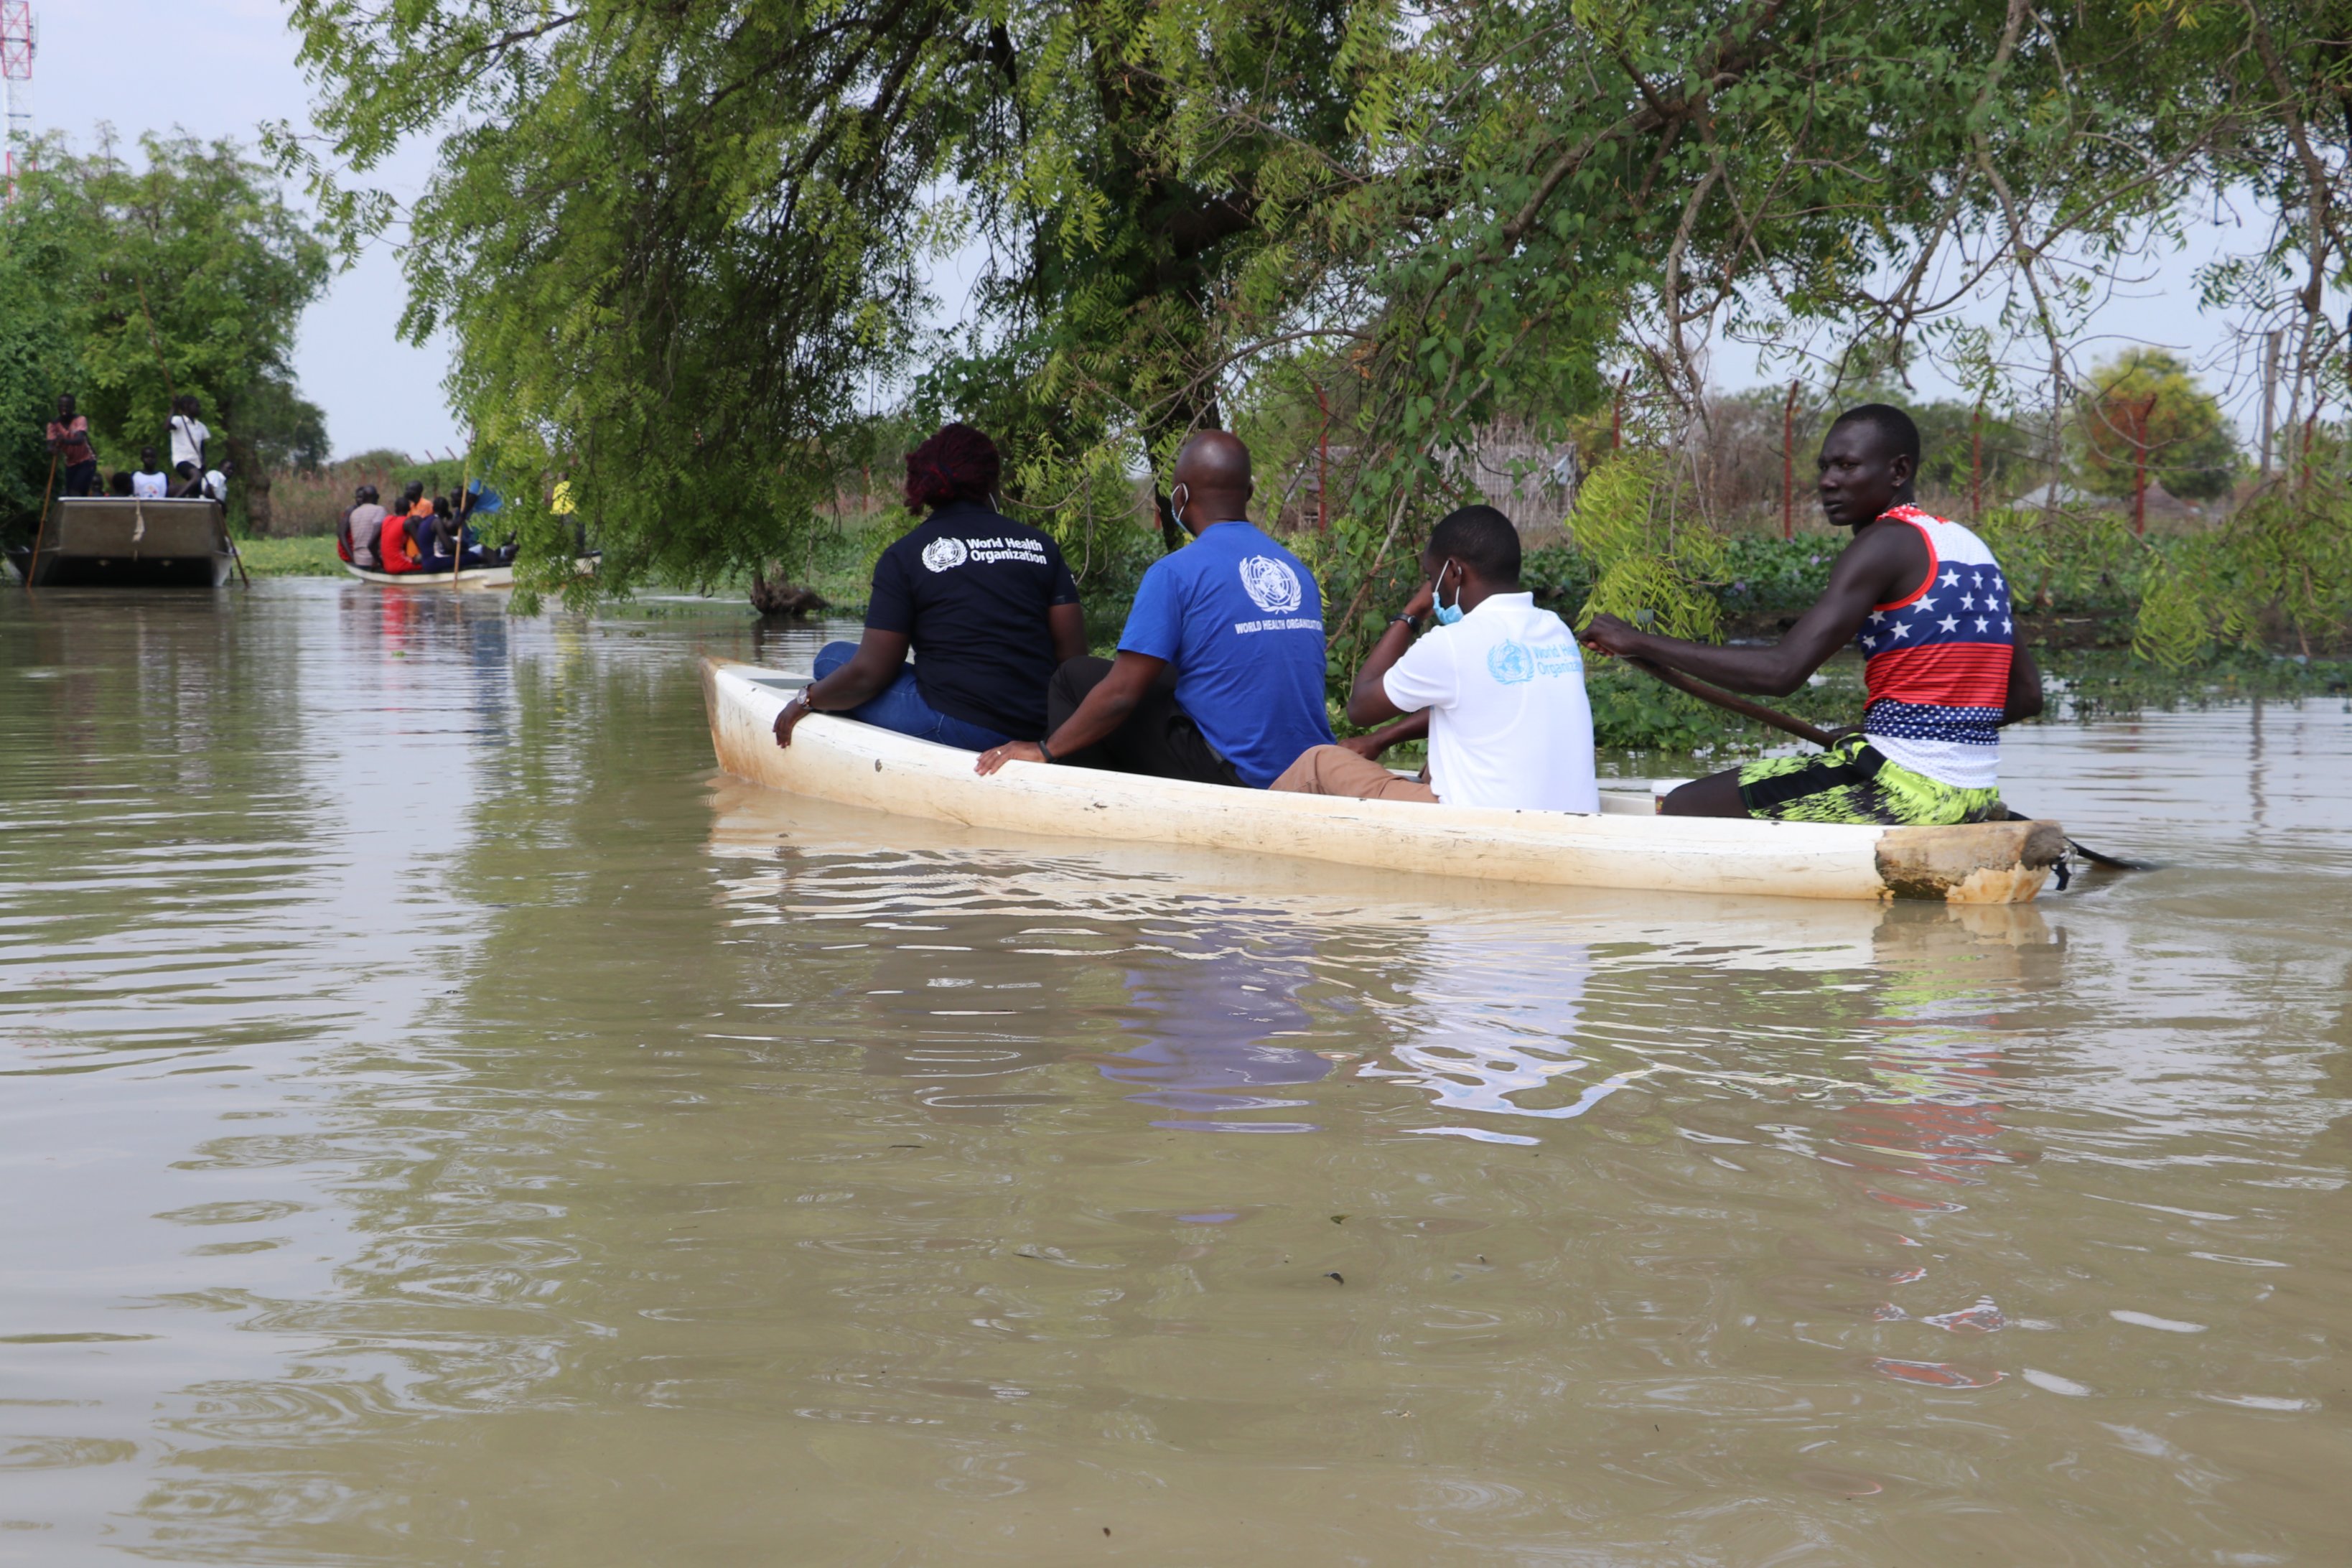 n flooded areas in South Sudan, WHO personnel use canoes to provide much-needed healthcare services.